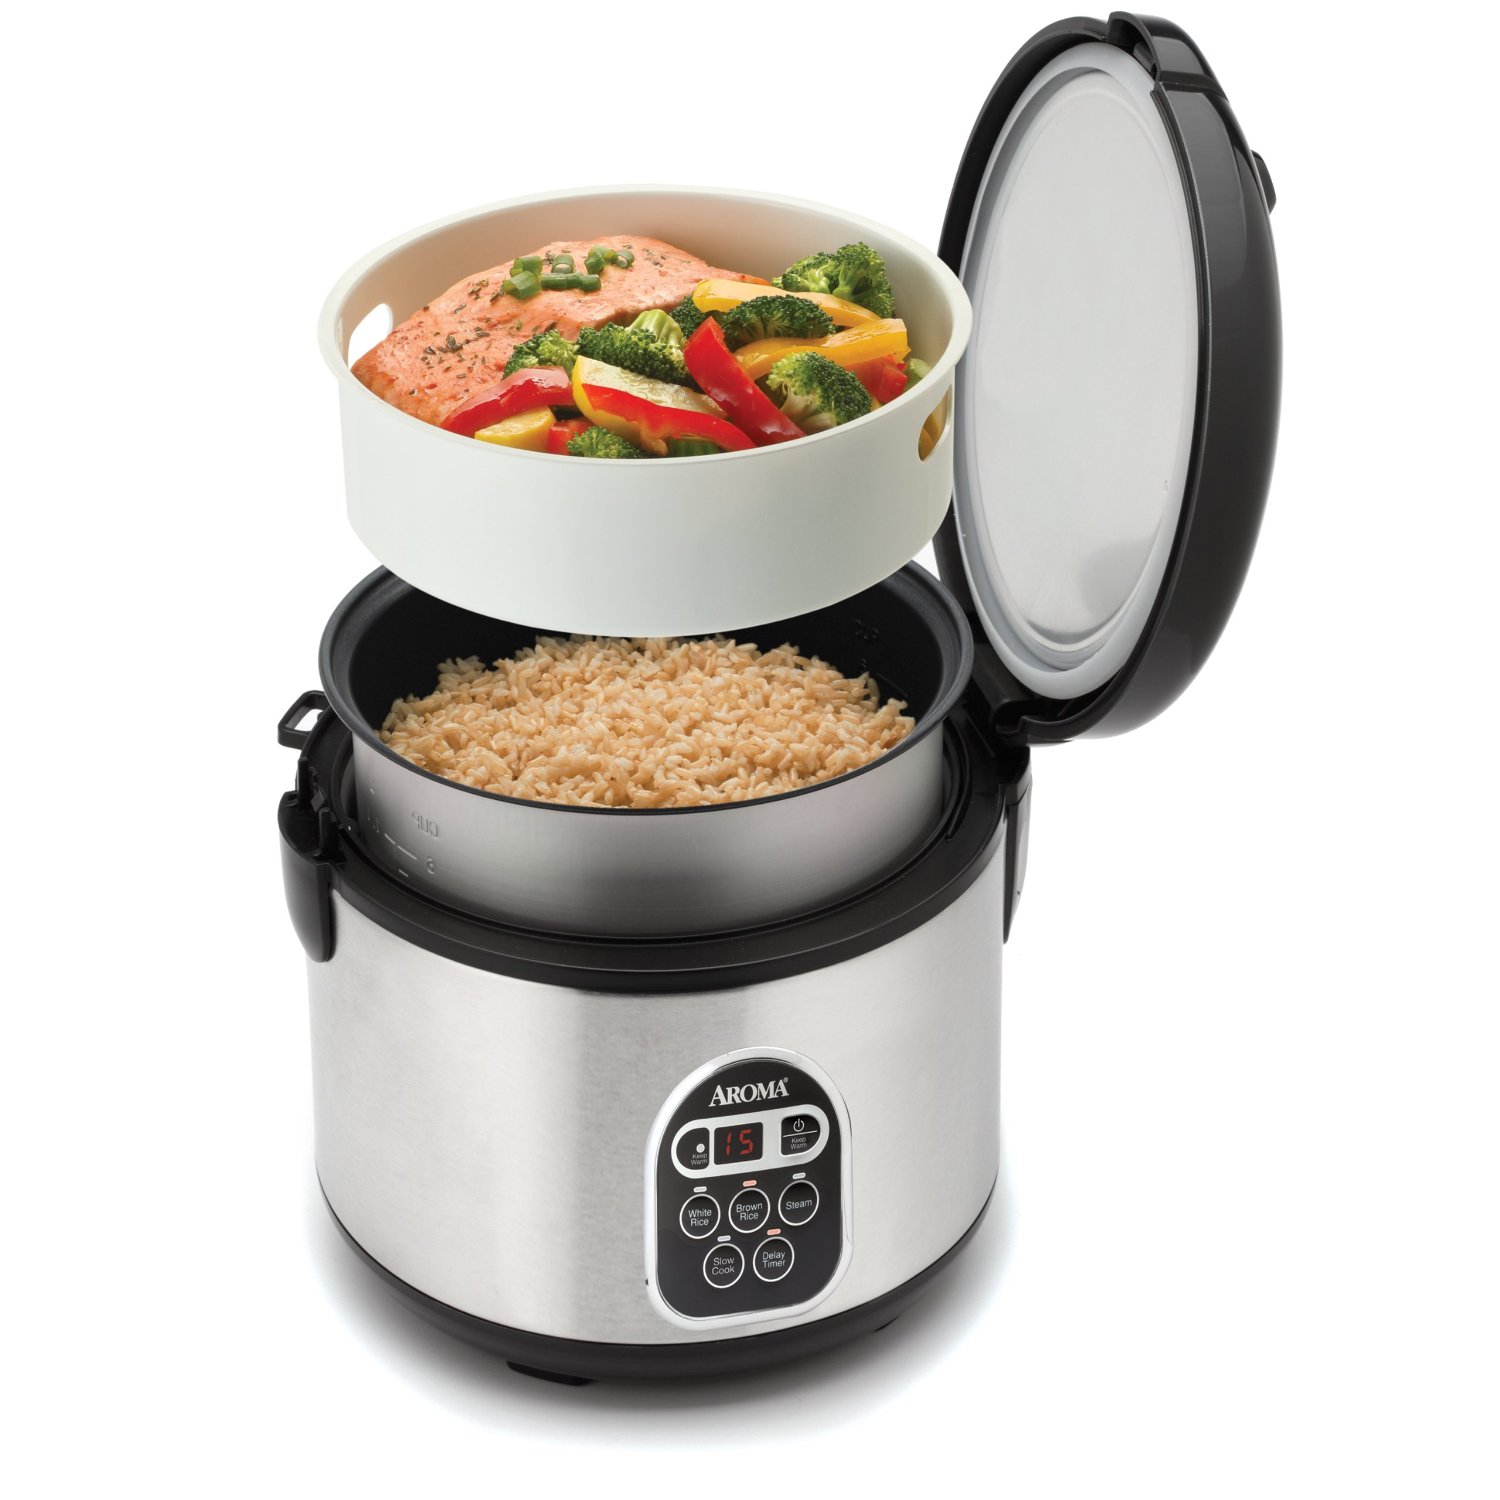 How Long Does an Aroma Rice Cooker Take to Cook Rice? - PlantHD